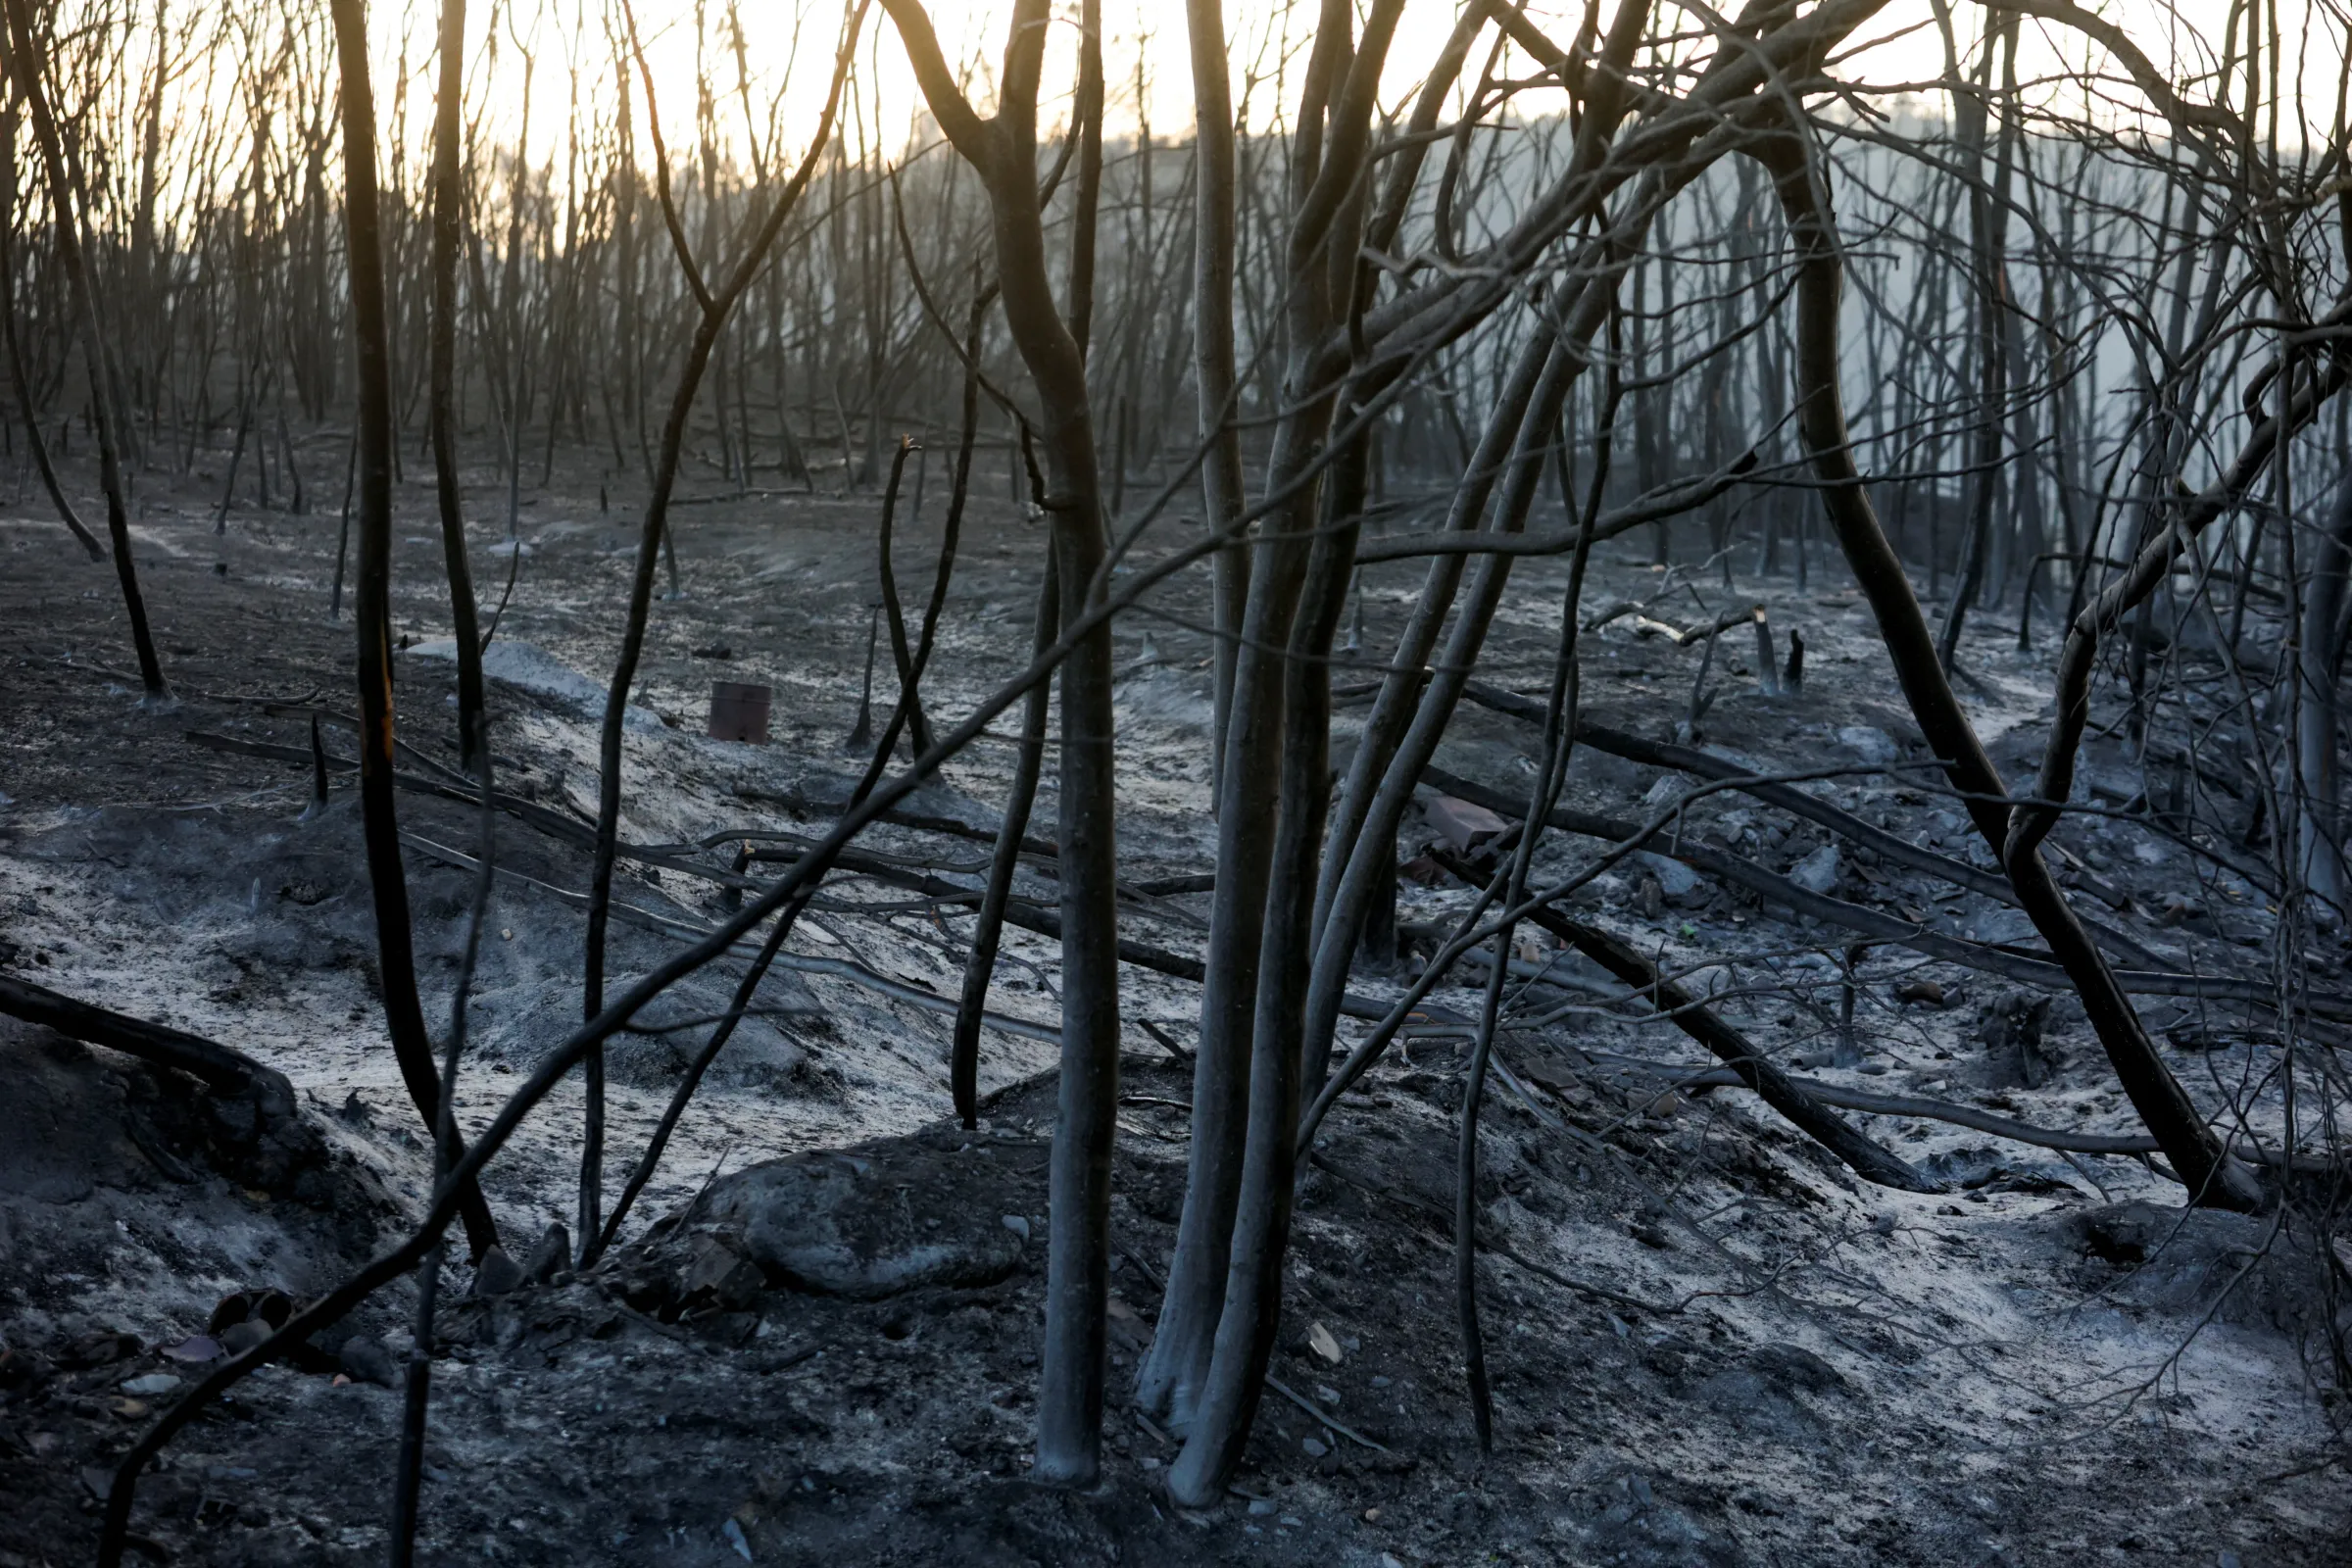 A view shows burnt trees after a wildfire in Verin, Spain